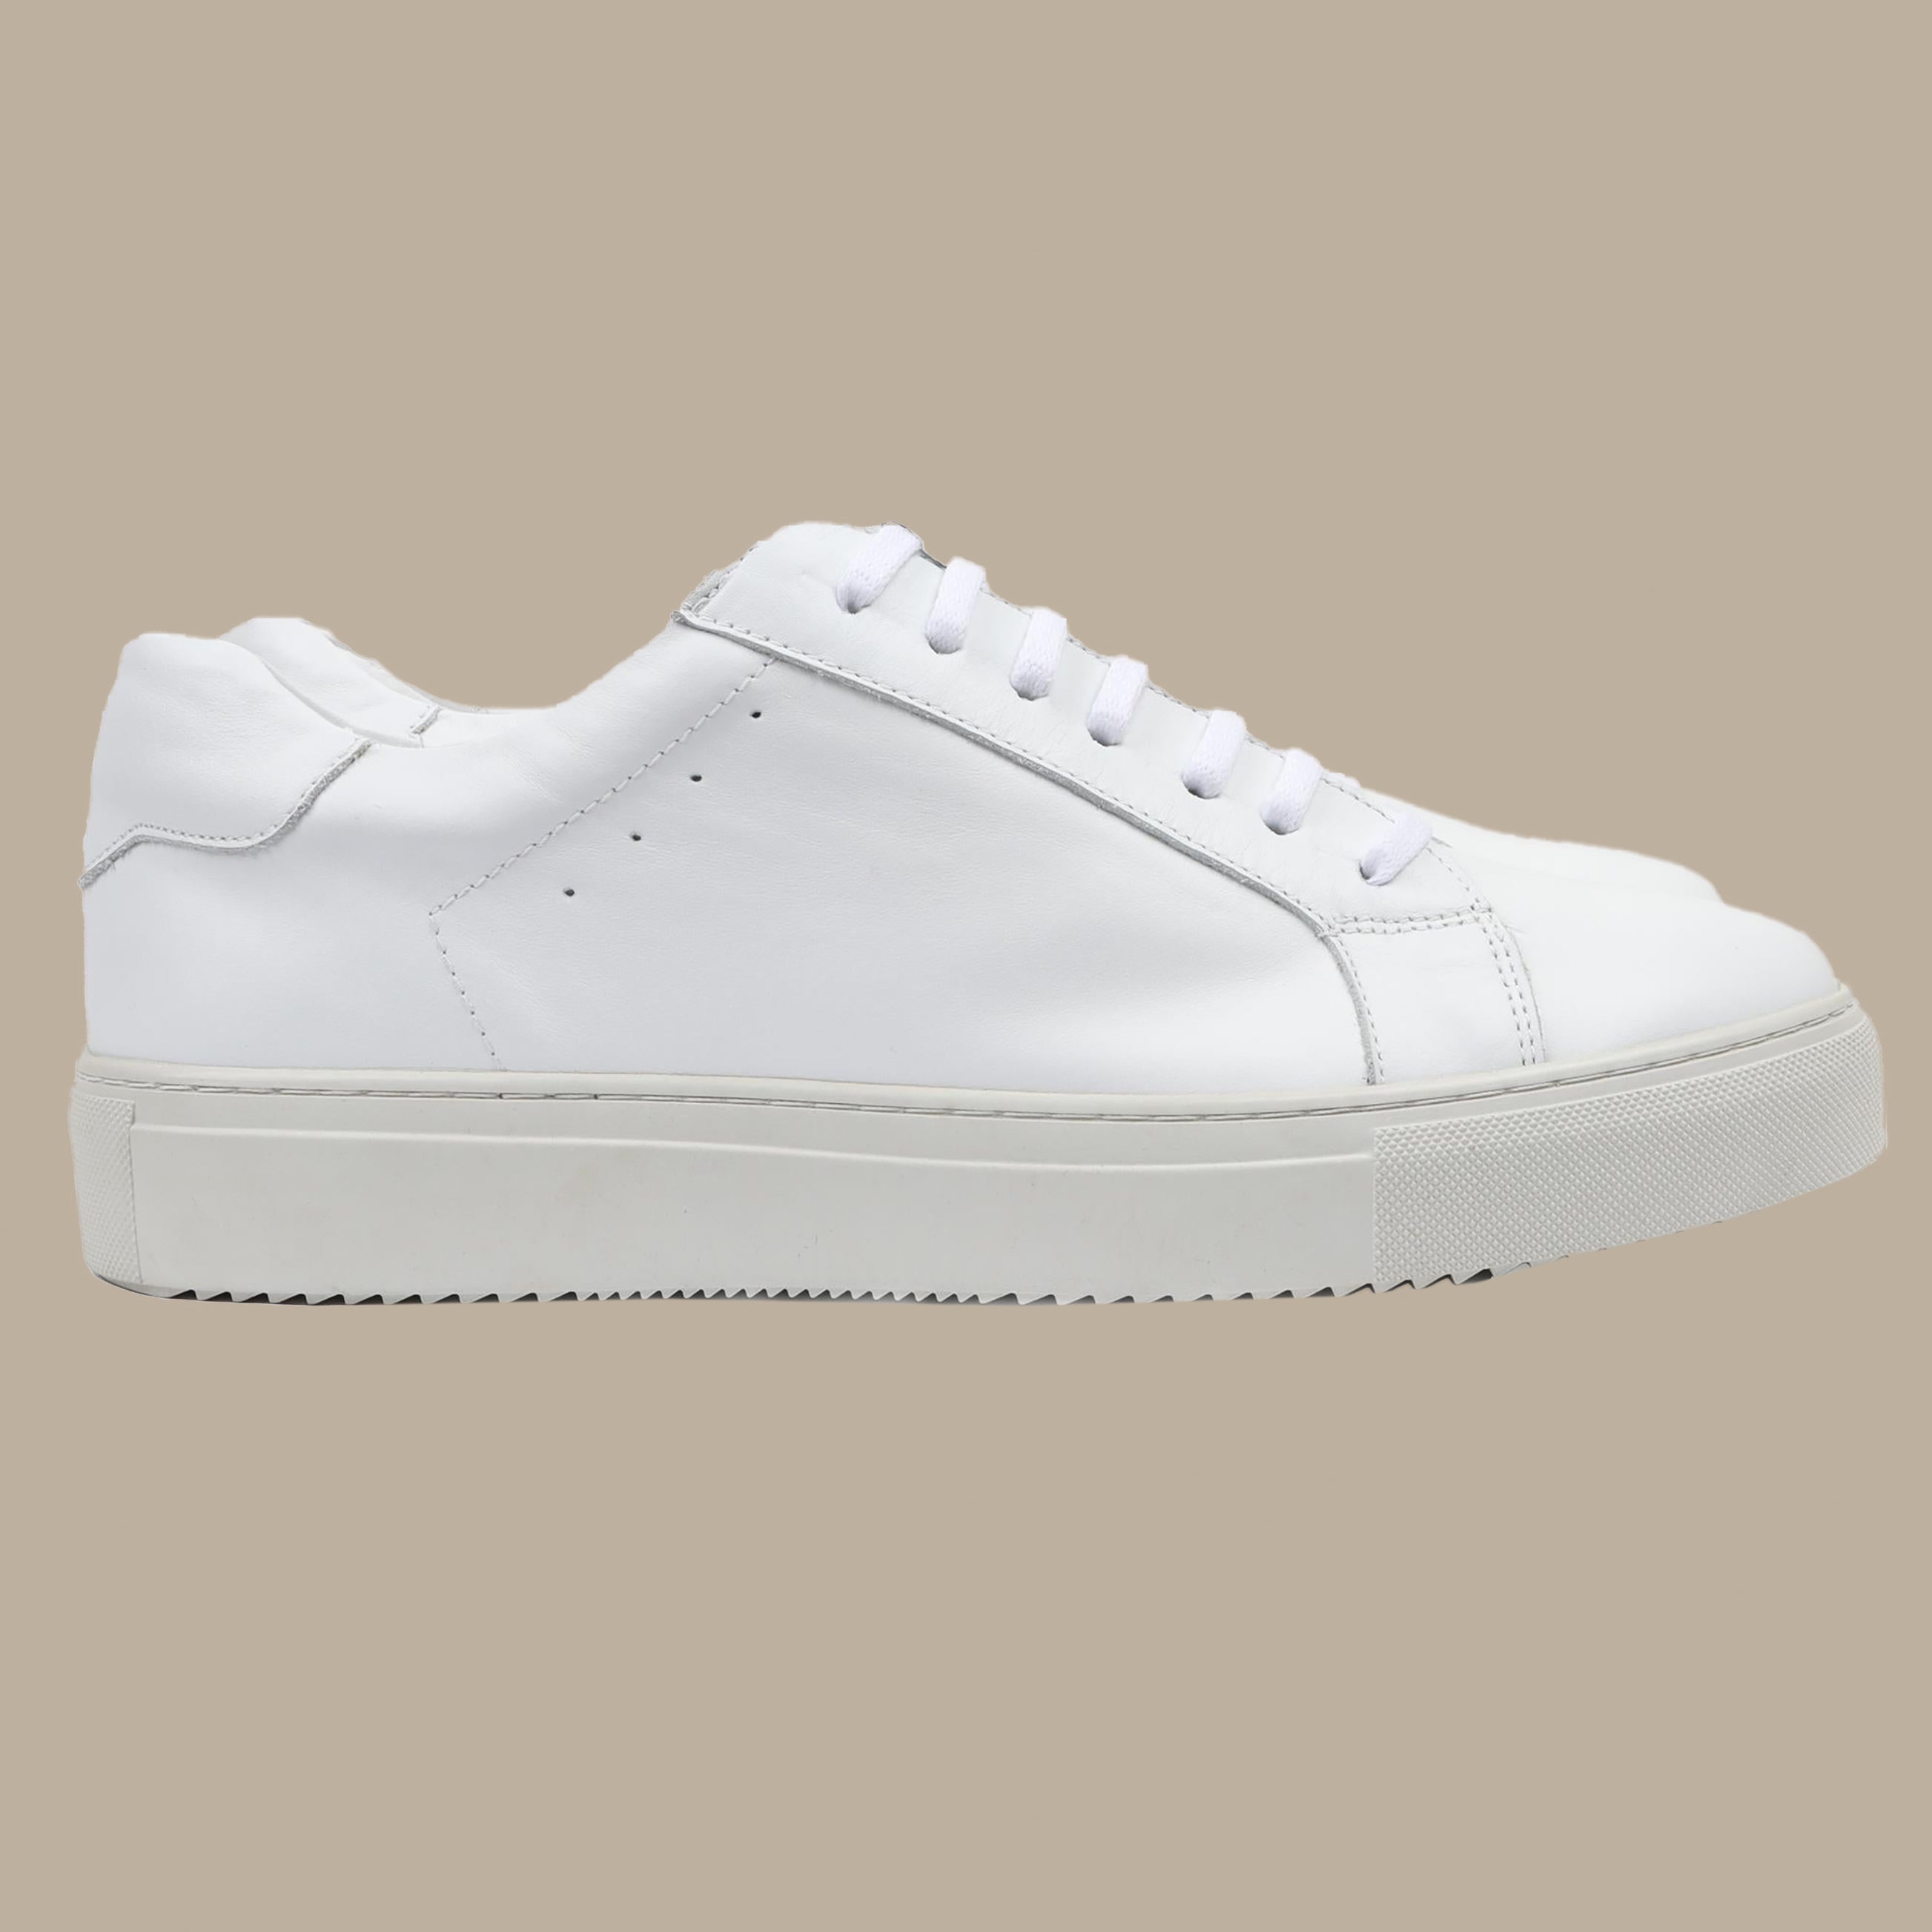 Basic Sneakers Grey Sole White